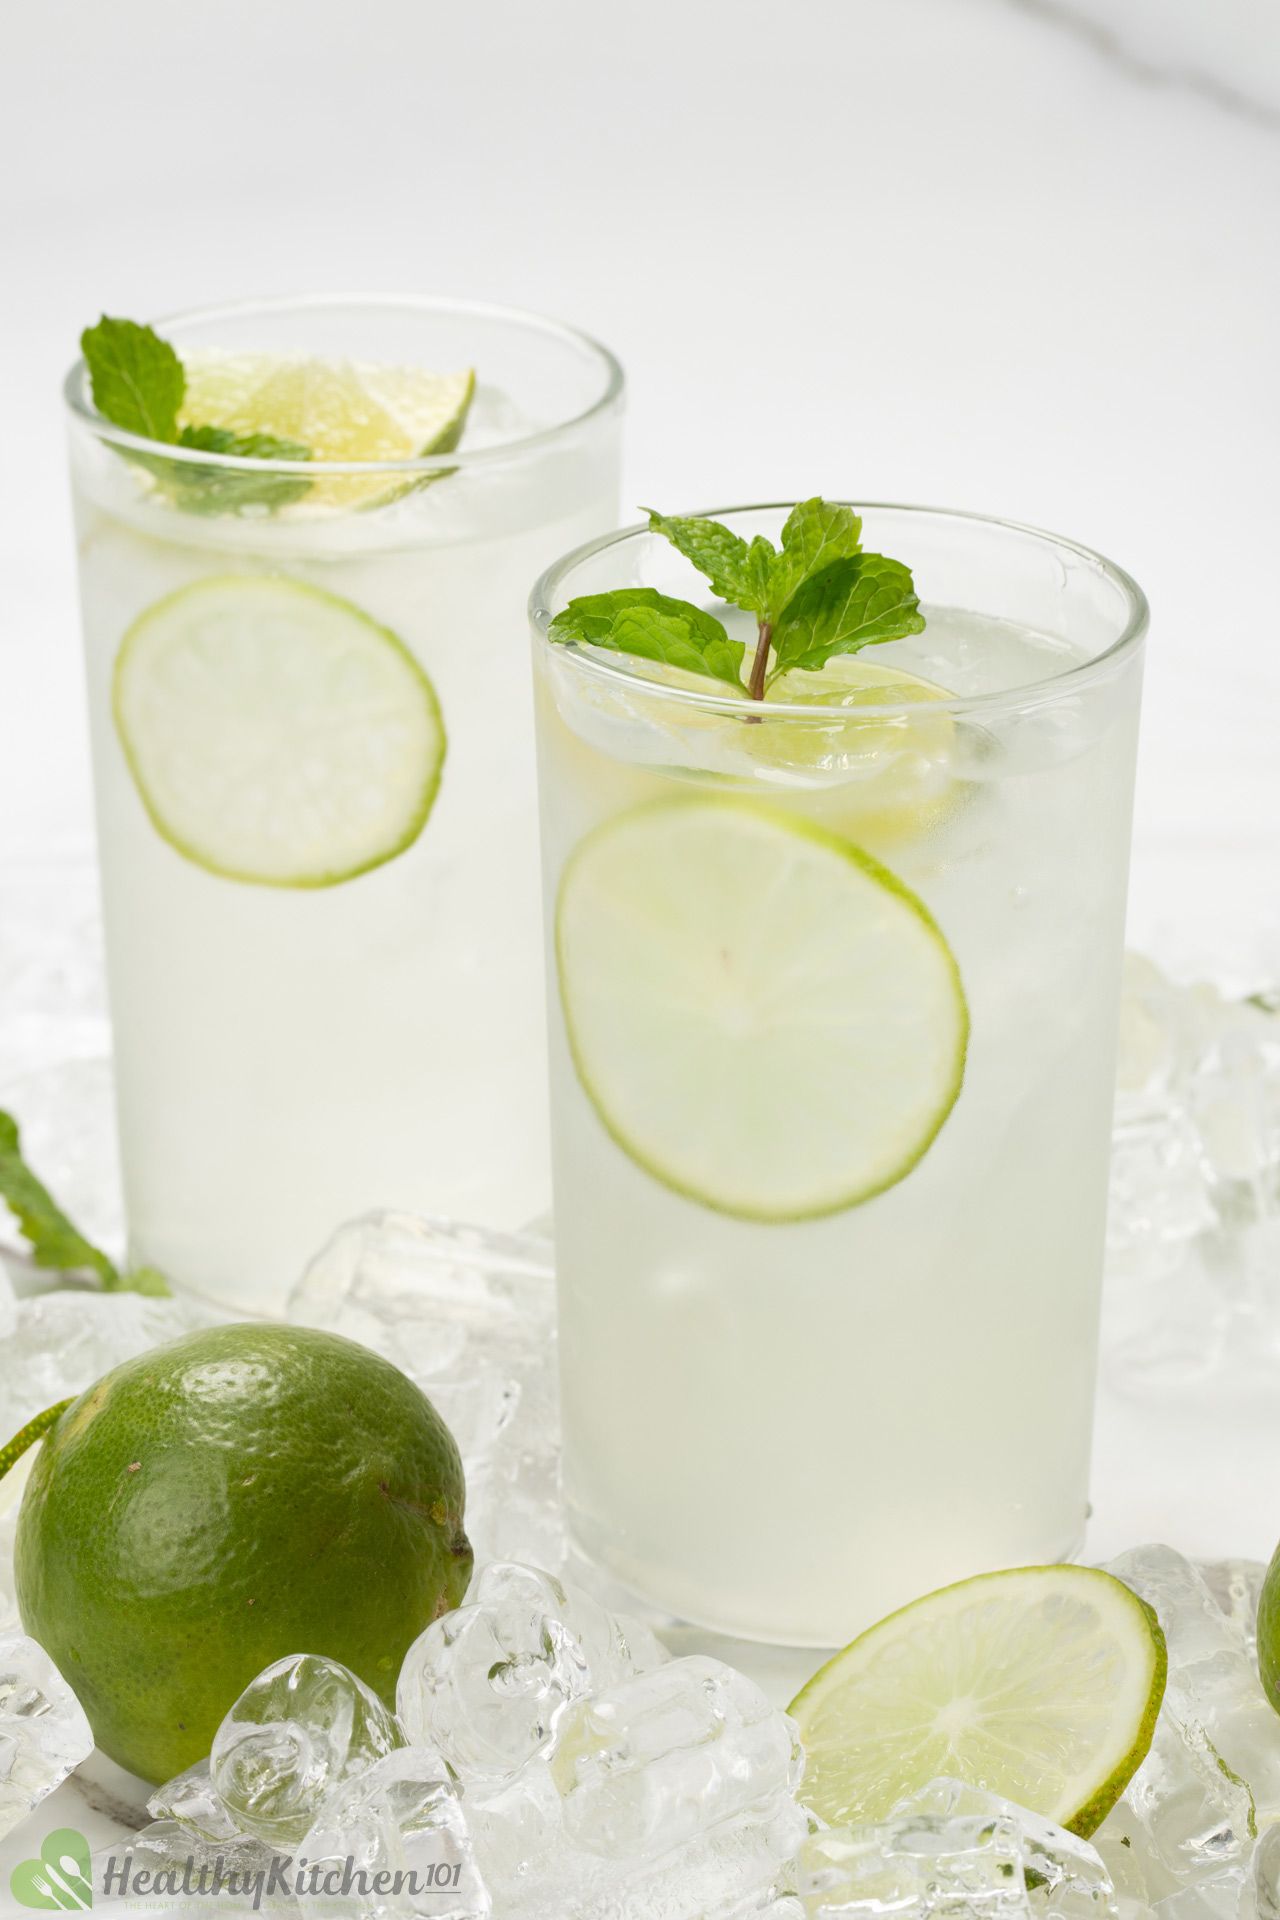 Can I Substitute Bottled Lime Juice for Fresh Lime Juice?